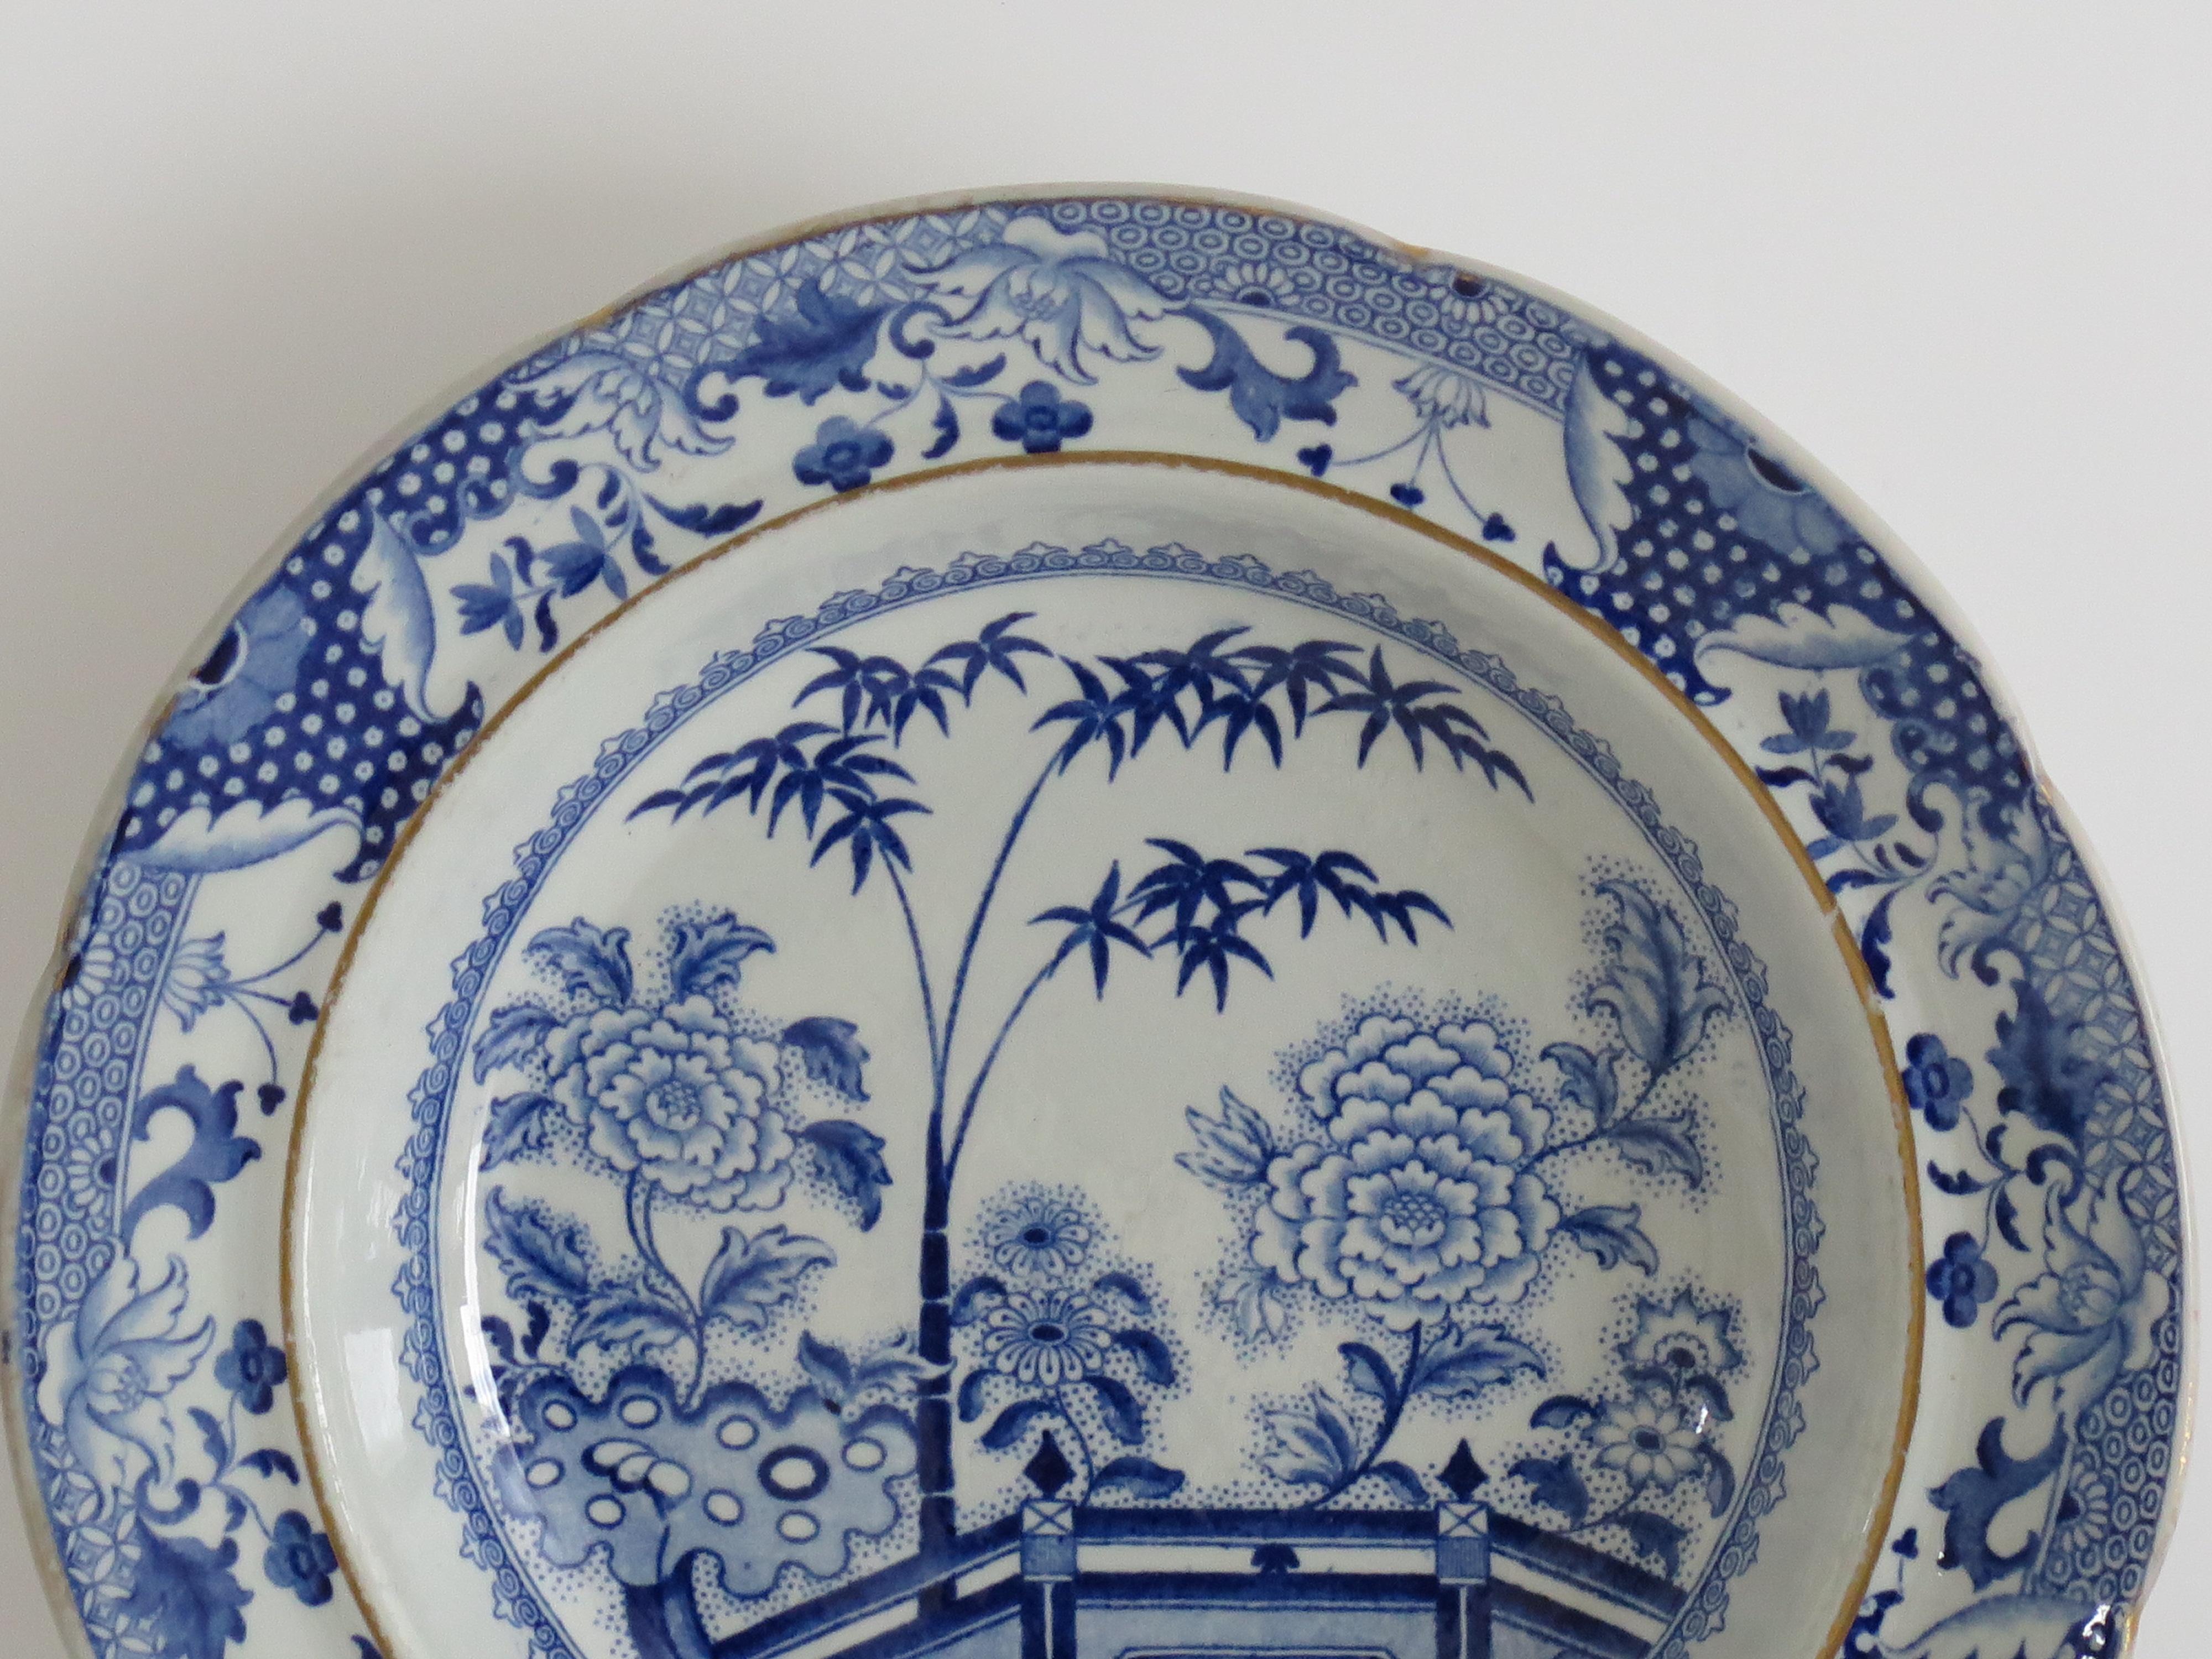 This is a good, late Georgian, ironstone Soup Bowl or Plate, in pattern no. 15, manufactured by the English Davenport factory, which was situated in Longport, Staffordshire, England between 1794 and 1887.

This oriental garden pattern is transfer